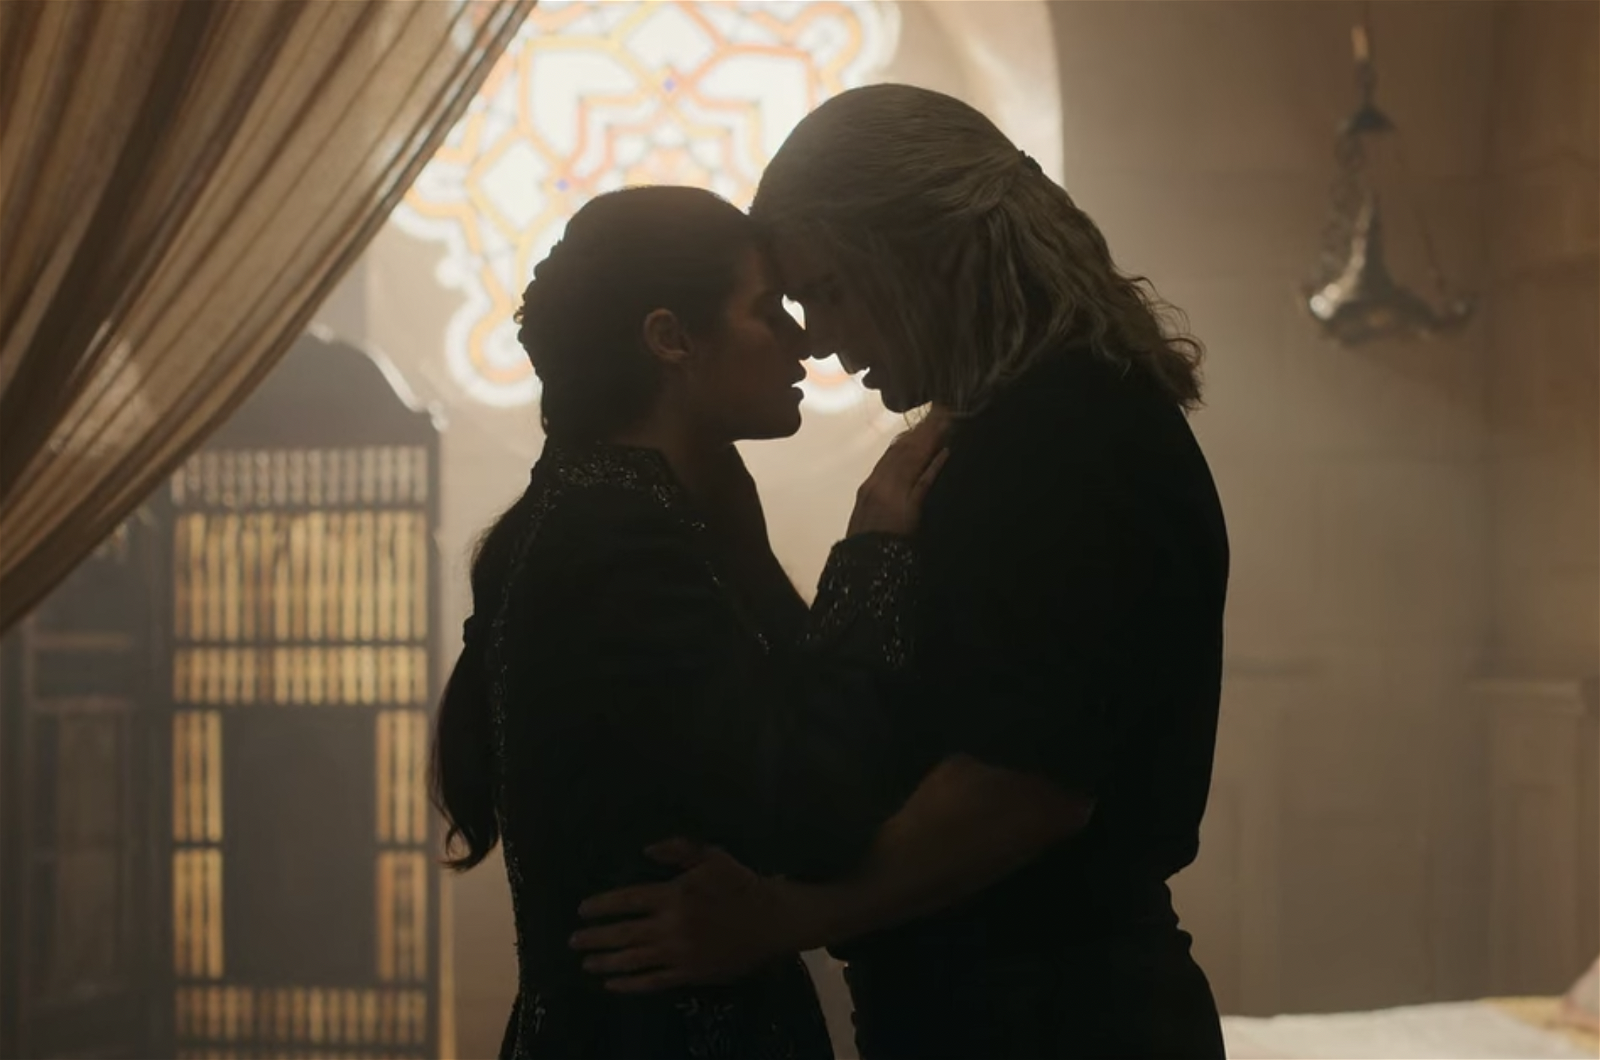 Henry Cavill and Anya Chalotra as Geralt of Rivia and Yennefer